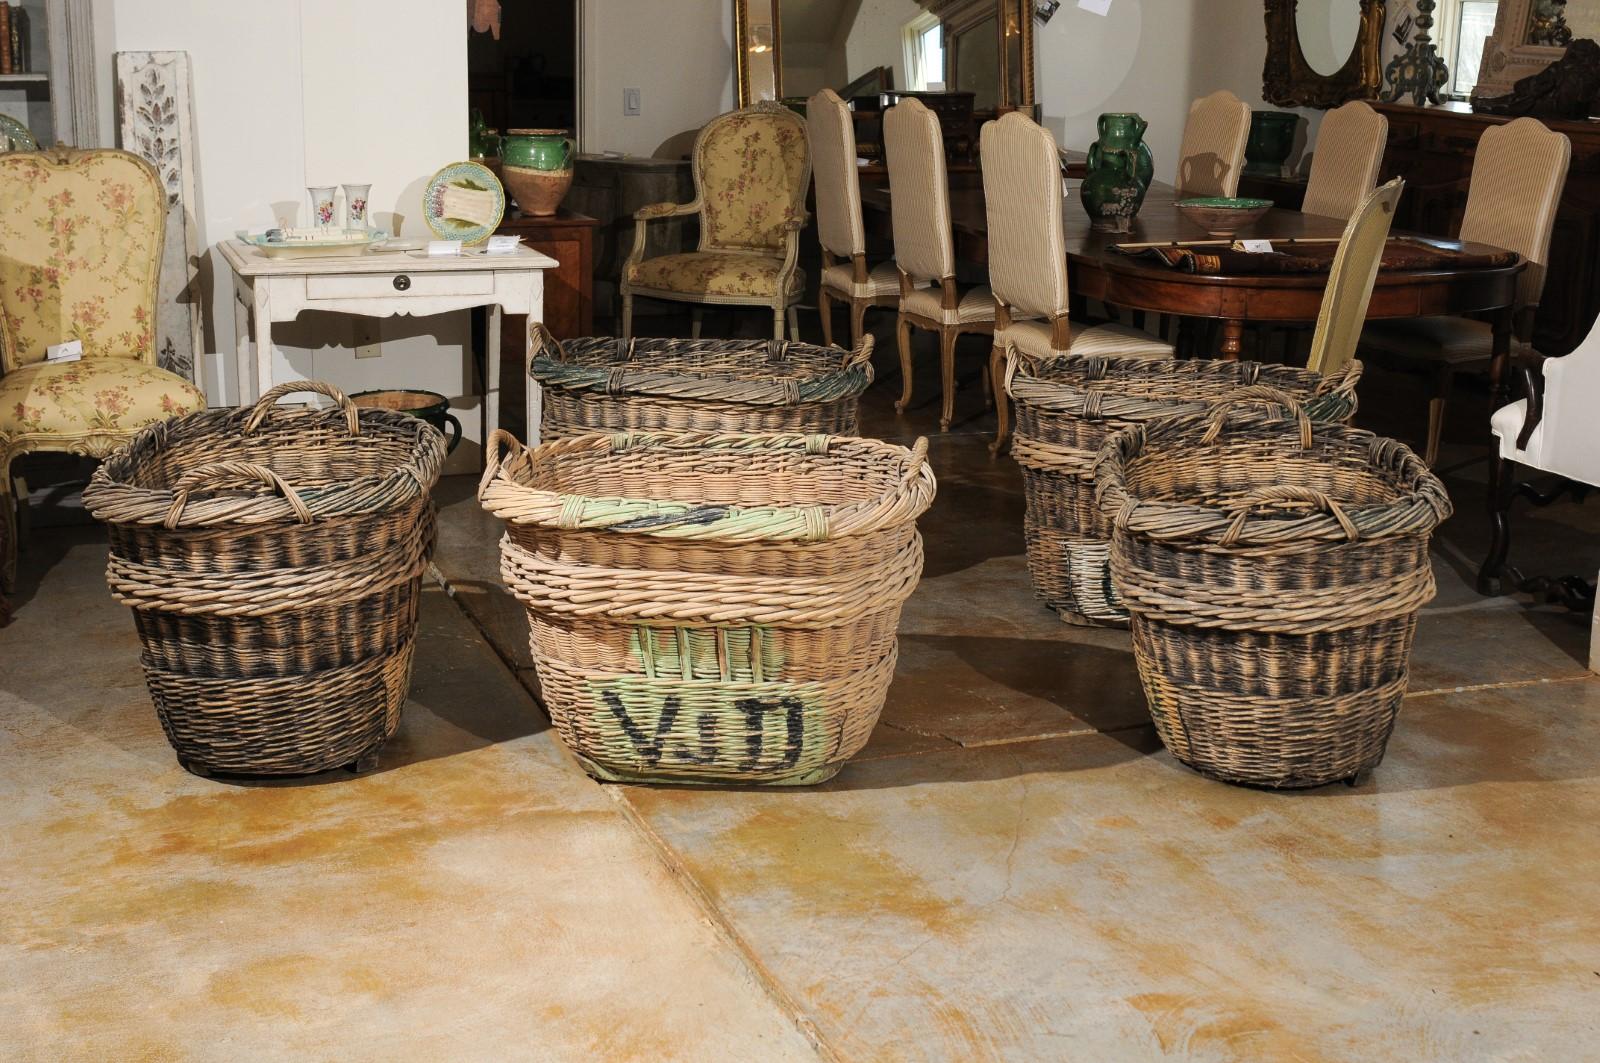 Hand-Crafted Large French Wicker Basket circa 1900 with Weathered Appearance 'One Left'